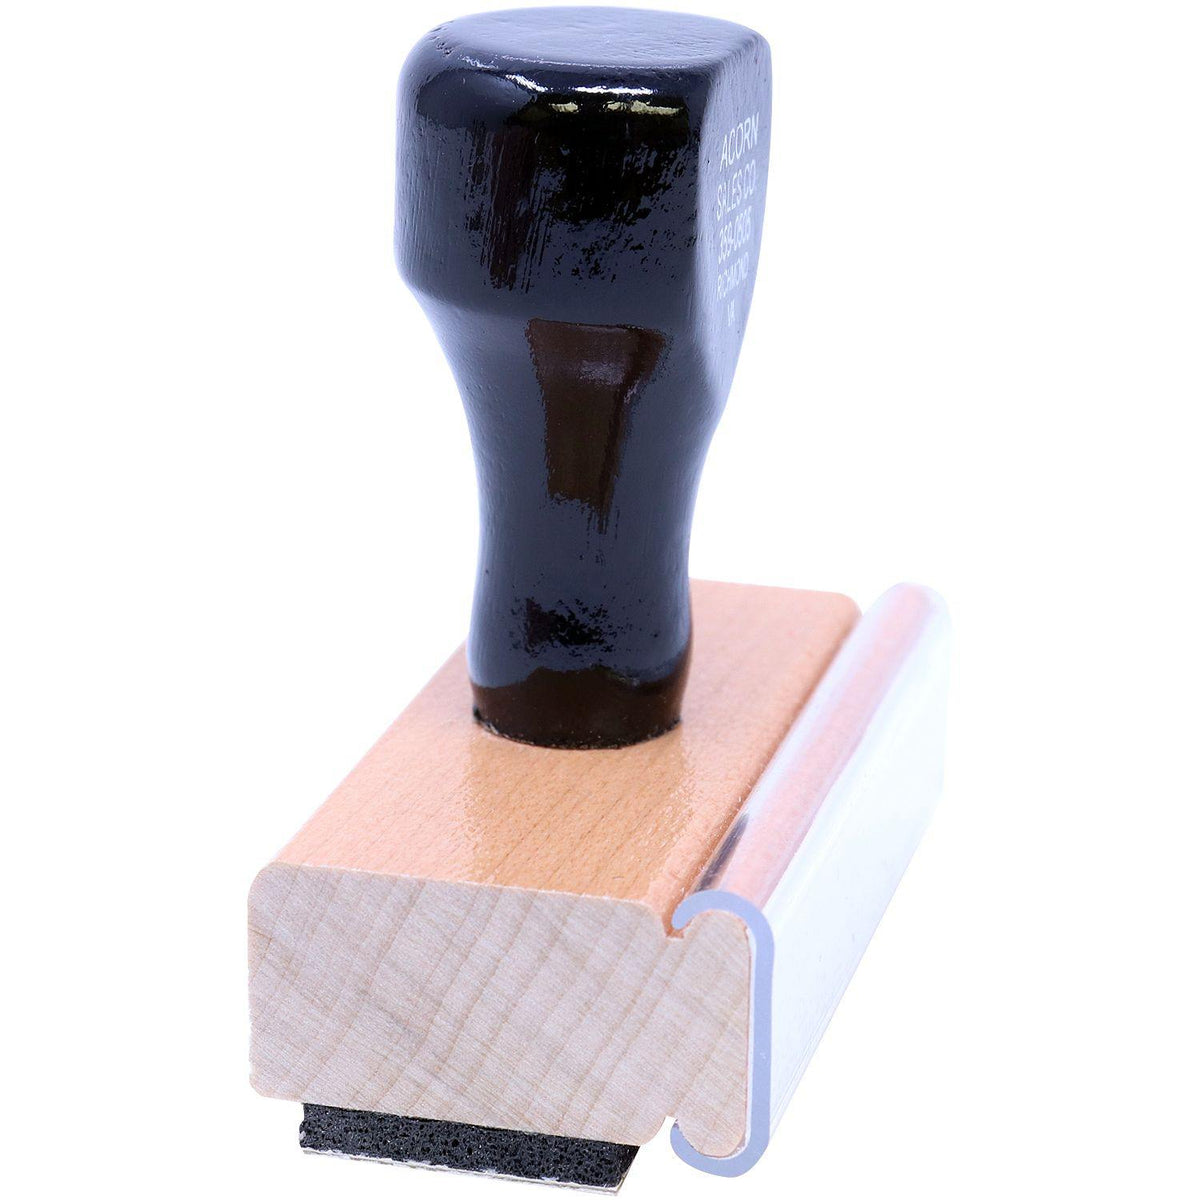 Side View of Bold COD Stamp Rubber Stamp at an Angle